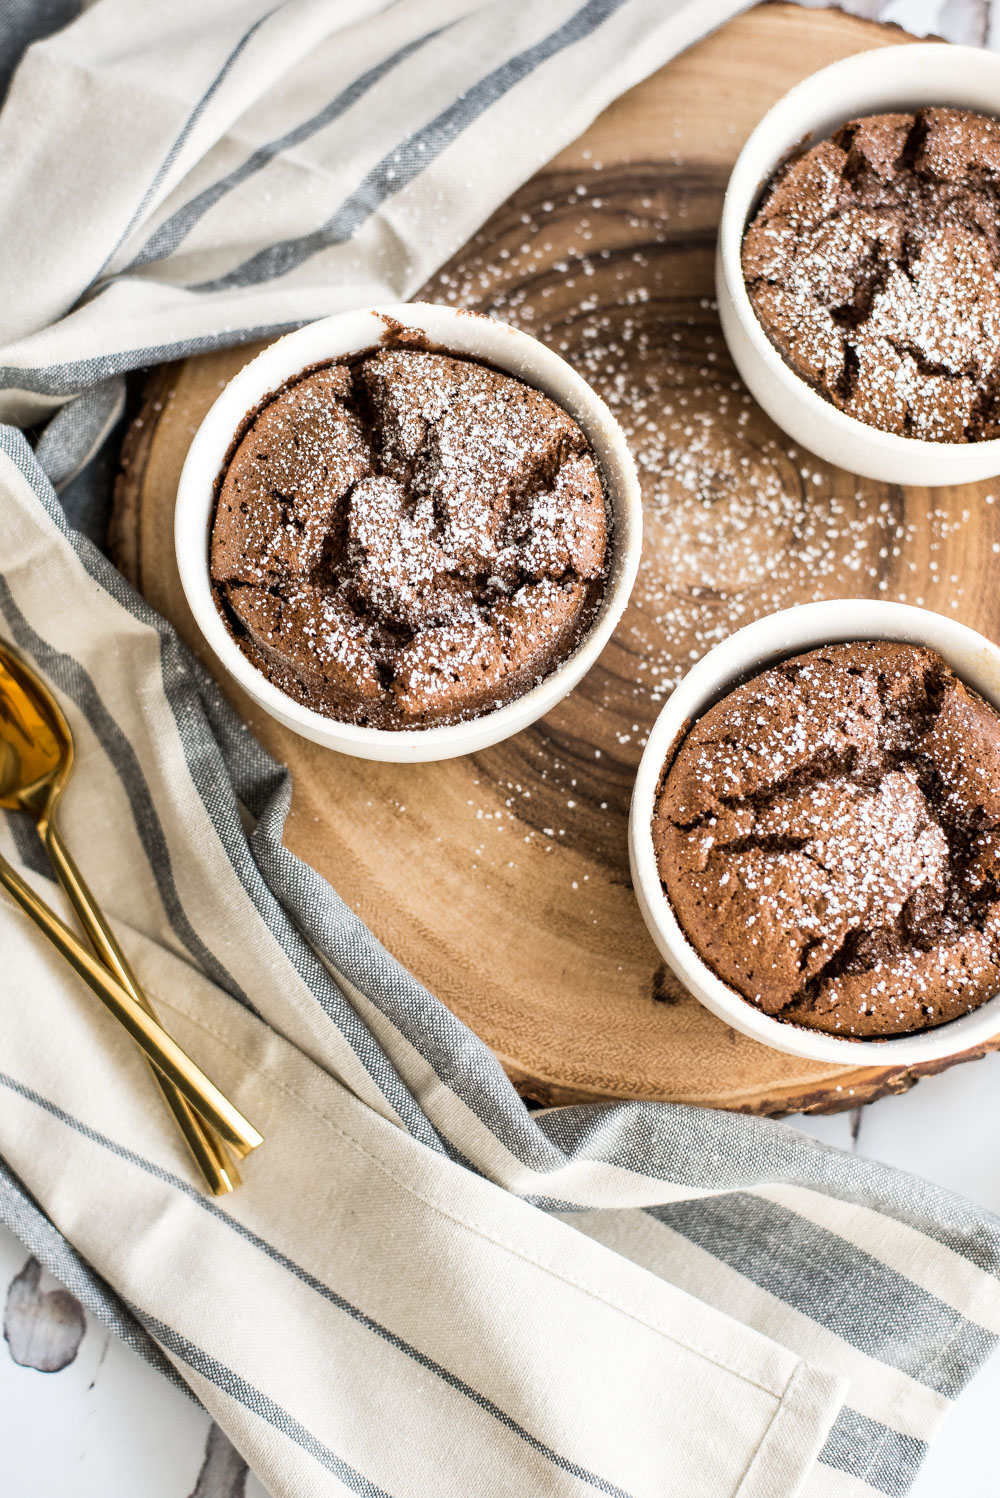 Easy cinnamon chocolate soufflés are nothing to be scared of. Soufflés are actually very simple once you get the technique down, so give this recipe a try!